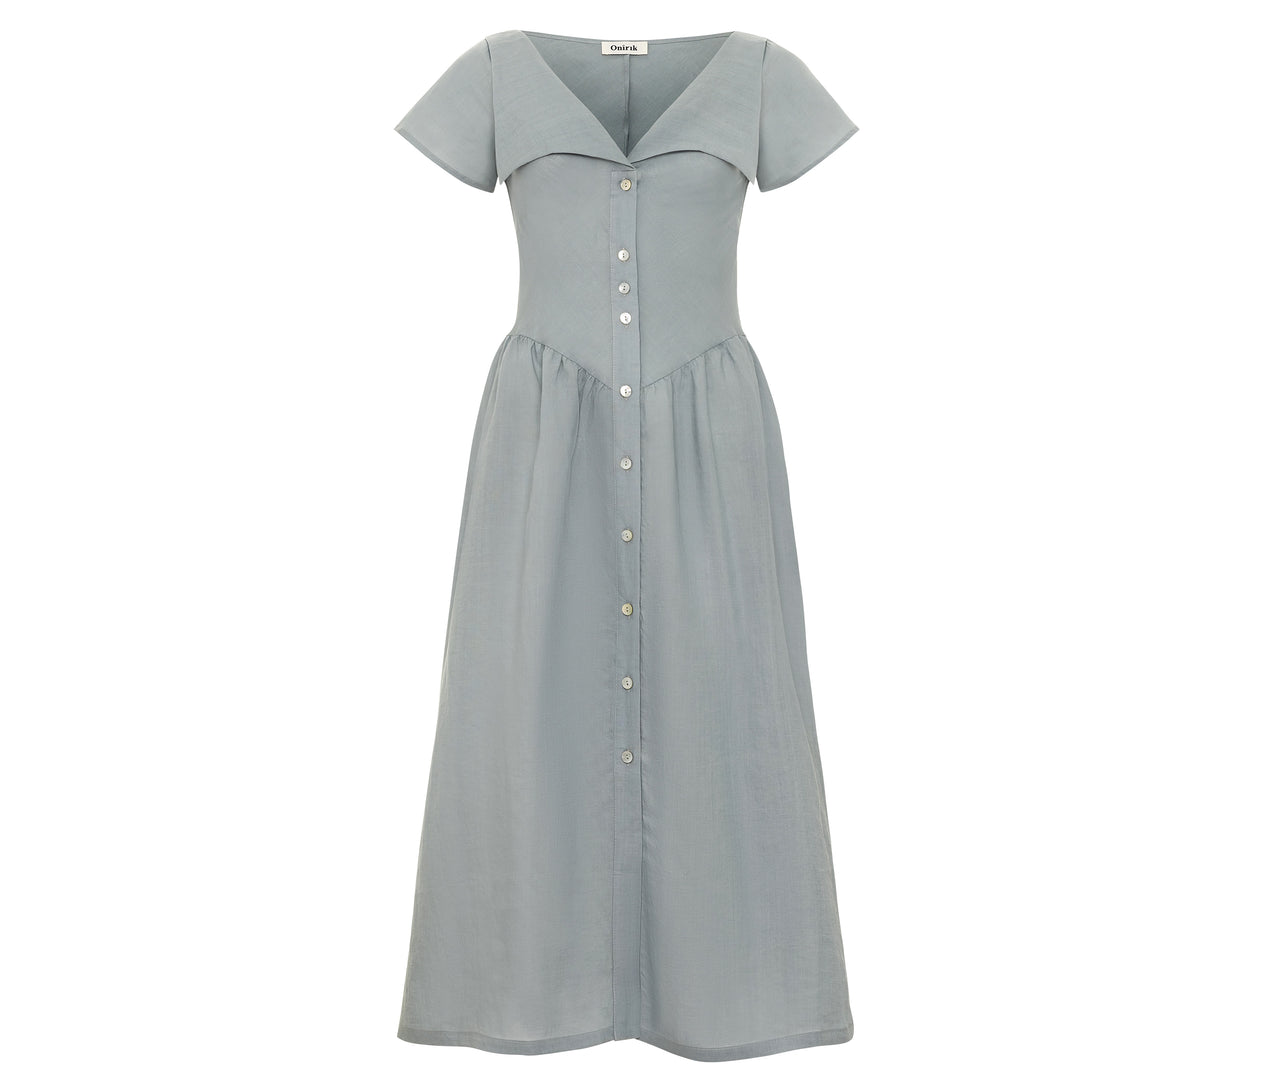 Helena Dress / 100% Linen in Pale Blue with Shell Buttons